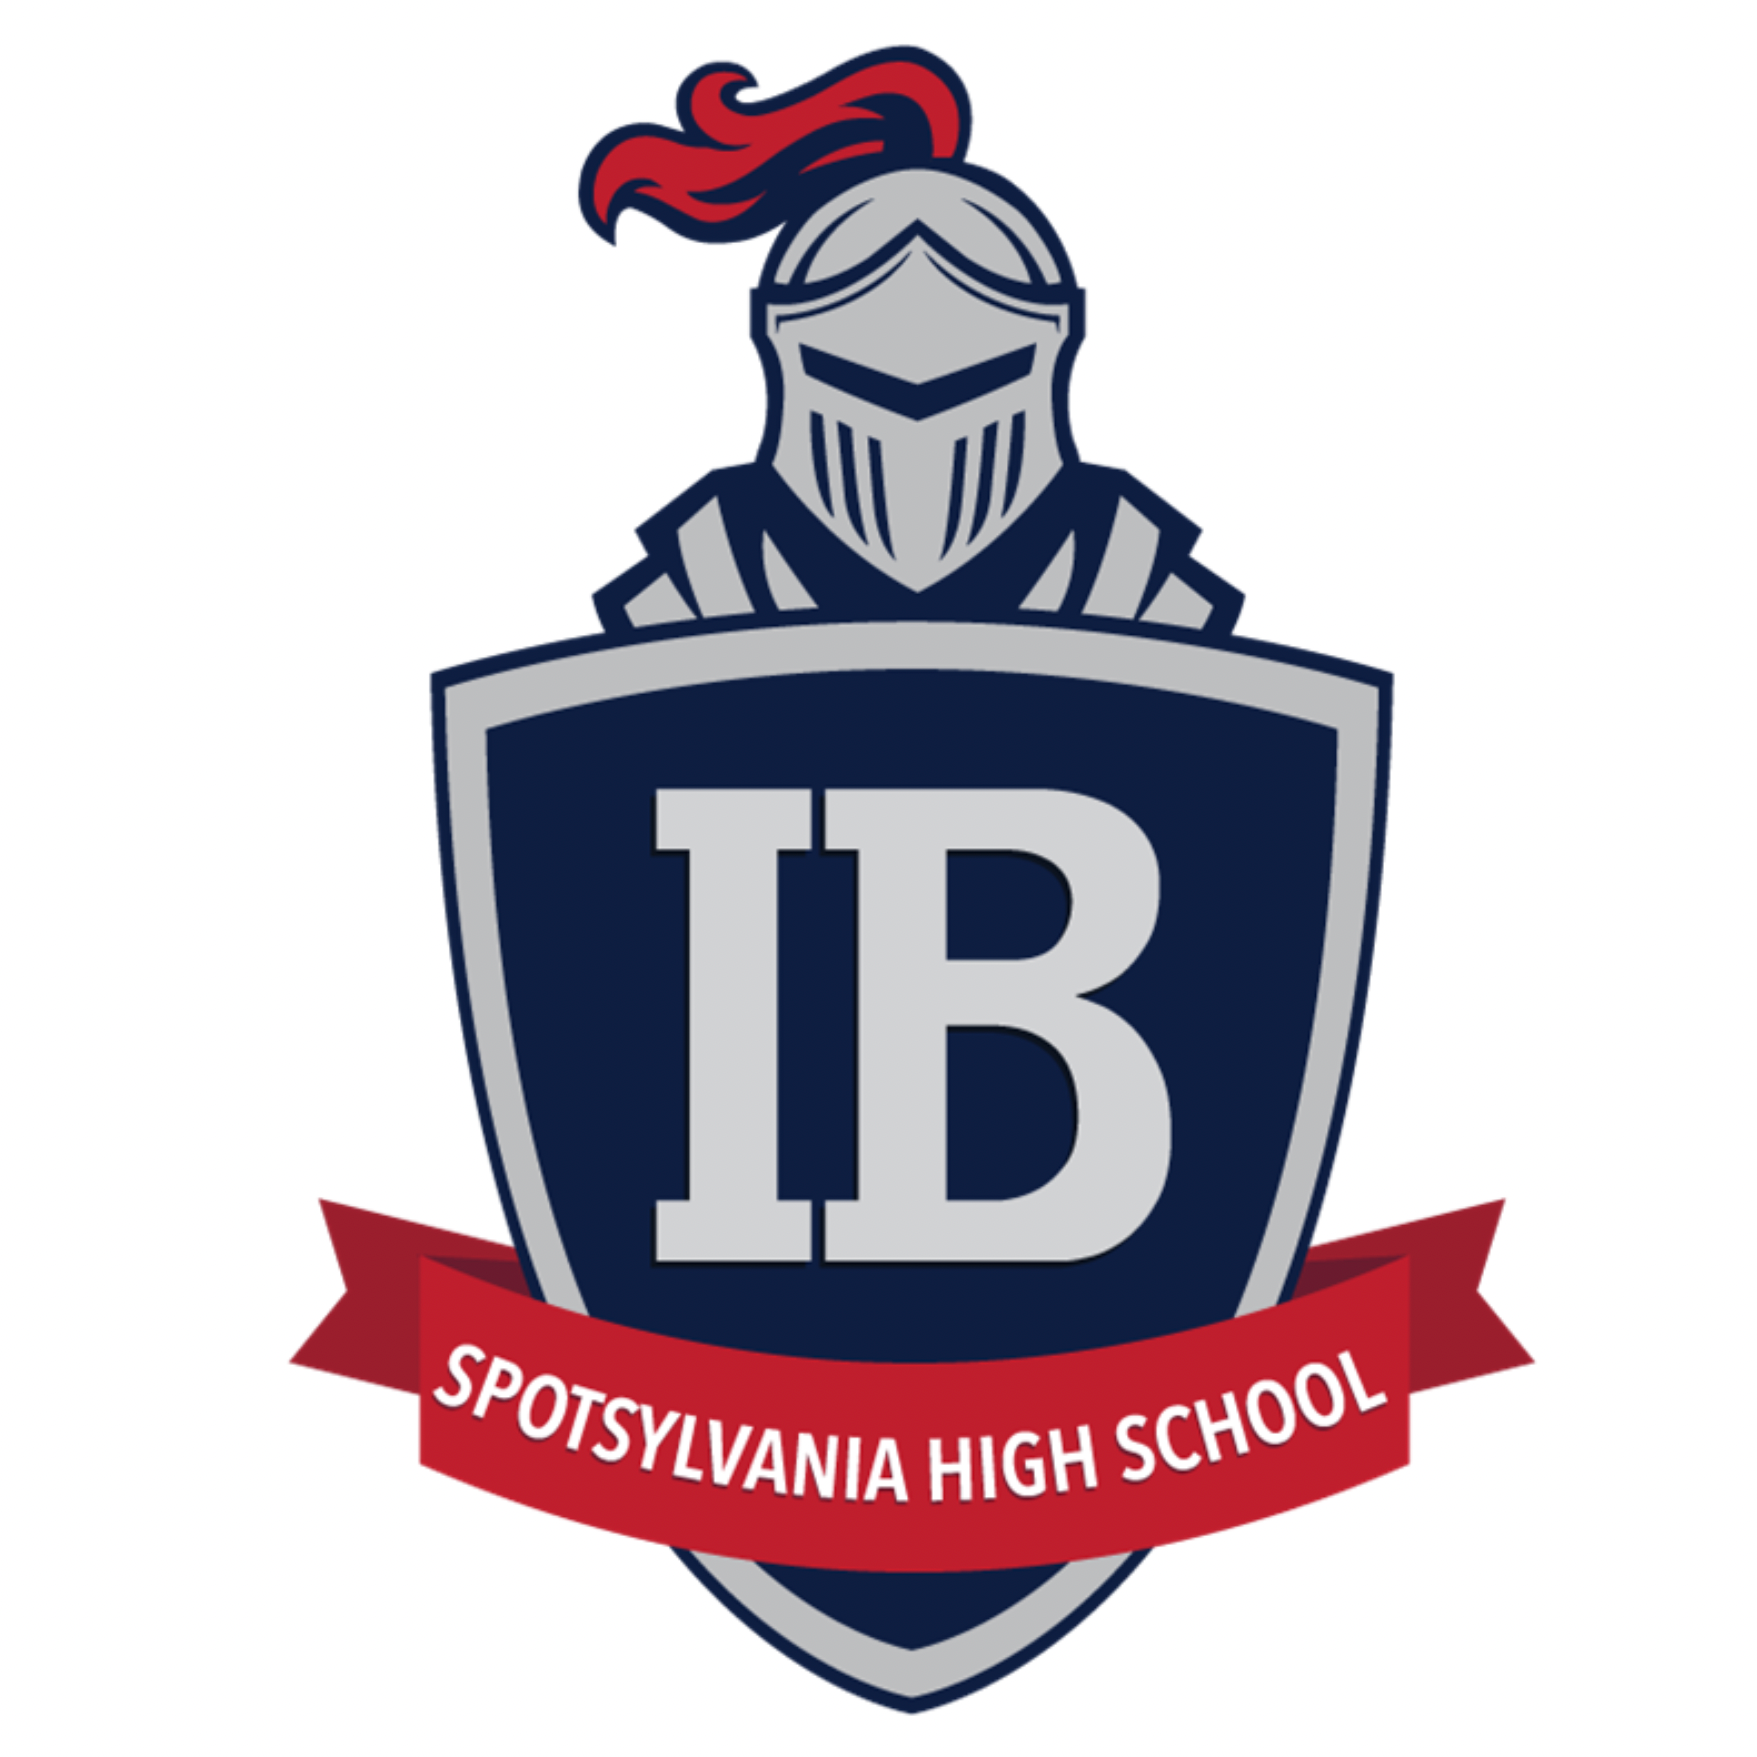 International Baccalaureate at Spotsylvania High School Logo showing a knight behind a shield with the acronym IB on it.